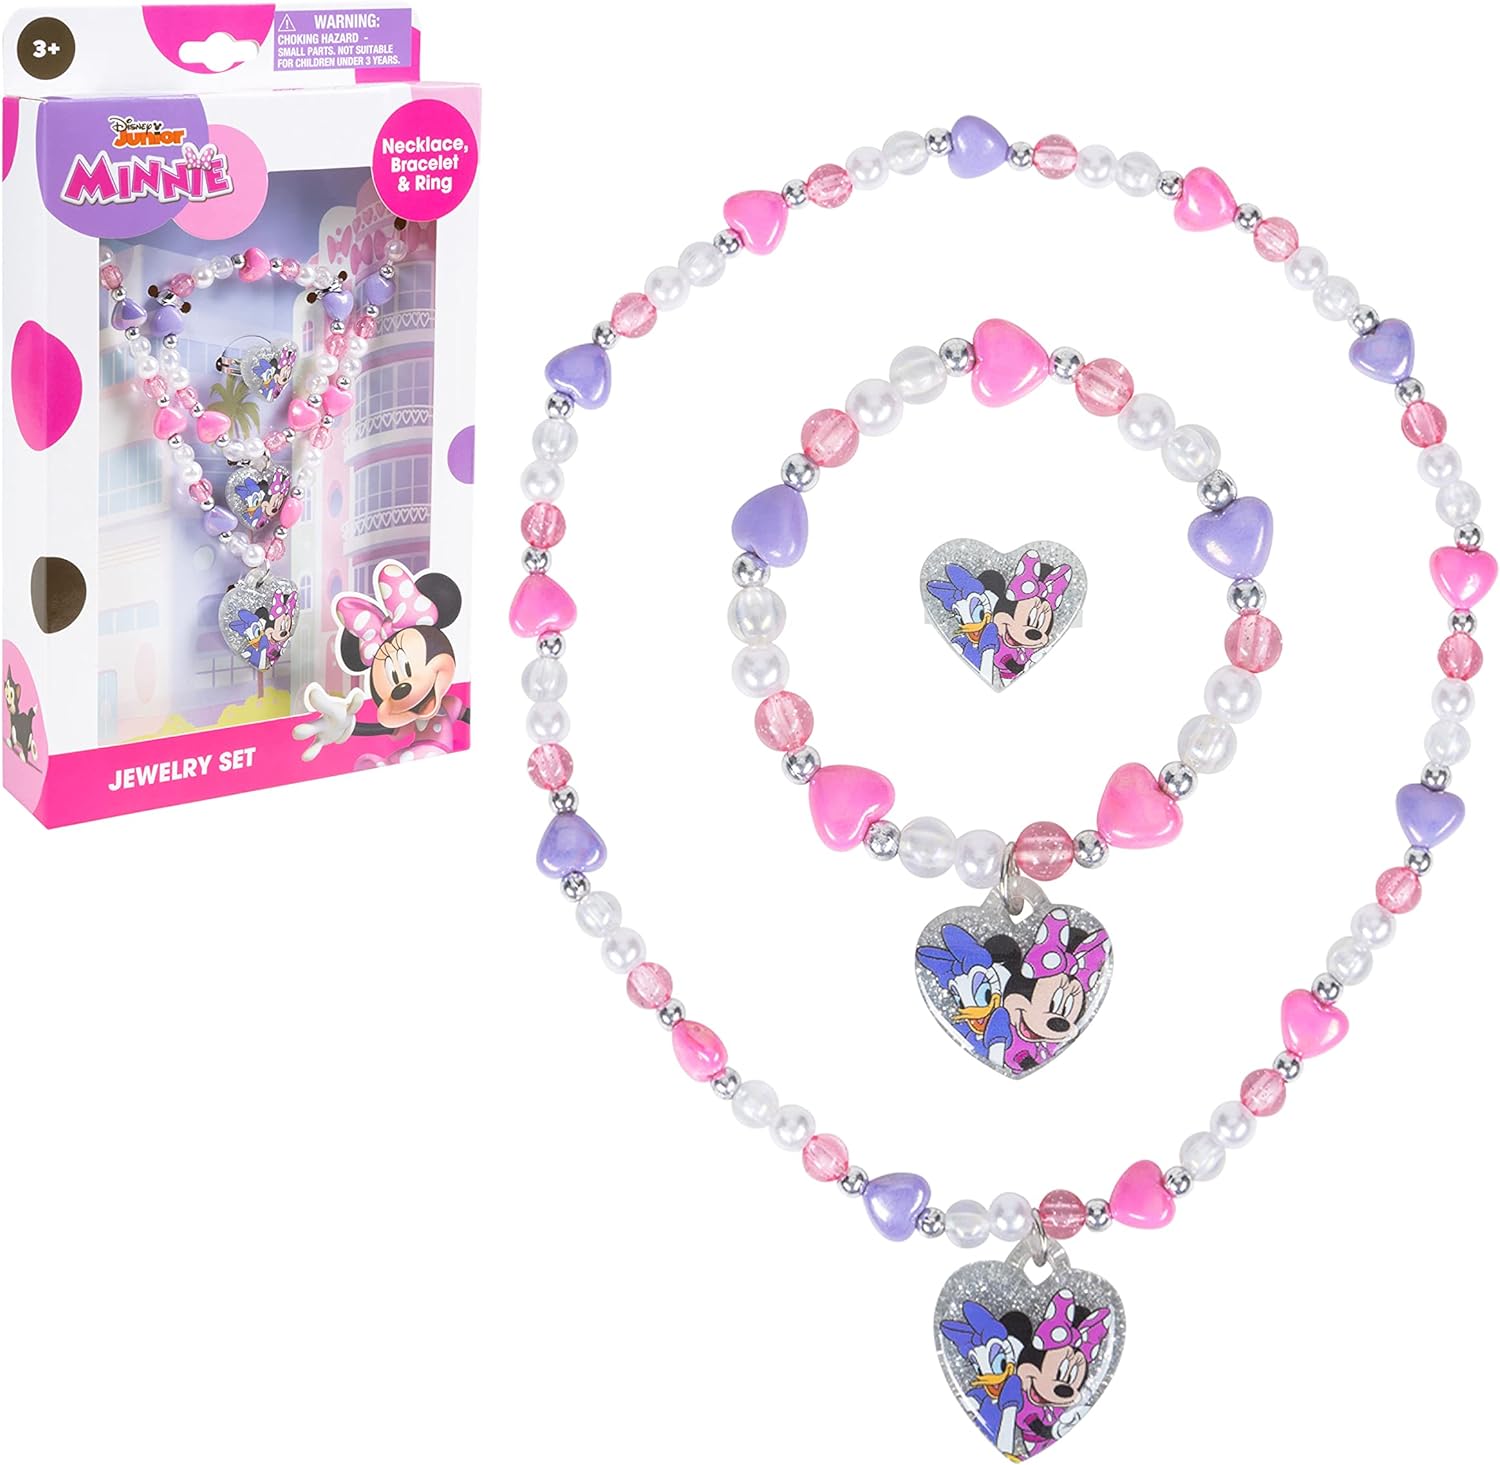 LUV HER Girls Jewelry Set - Dress up 3 Piece Toy Jewelry Box Set with Bead Necklace, Bracelet and Ring - Play Accessories - Ages 3+